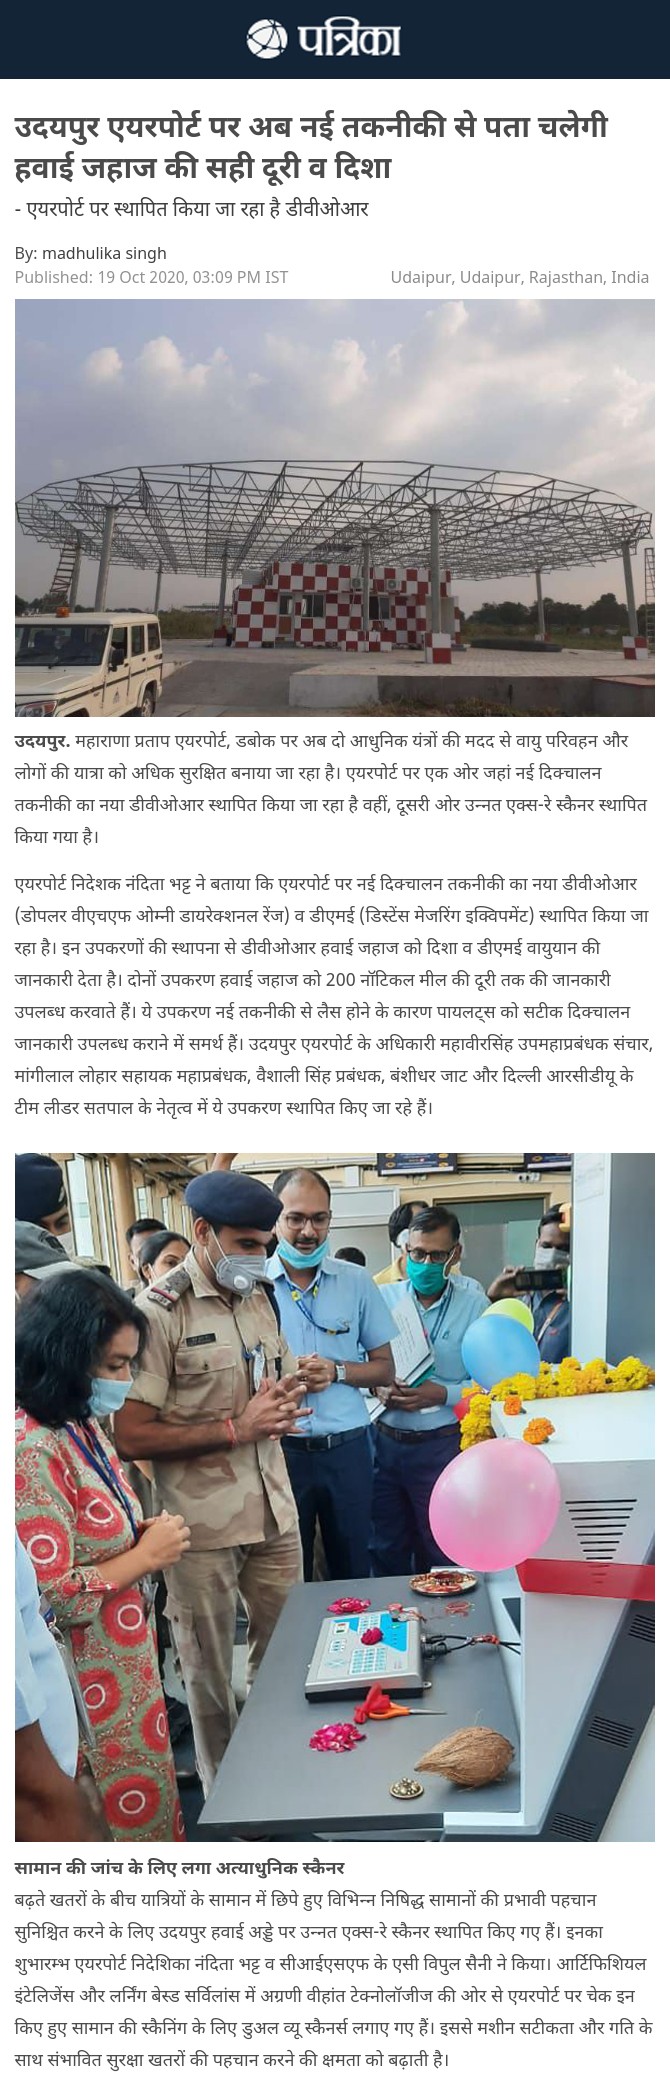 Inauguration of Dual View X-Ray Baggage Scanner at Udaipur Airport - Story covered by Rajasthan Patrika